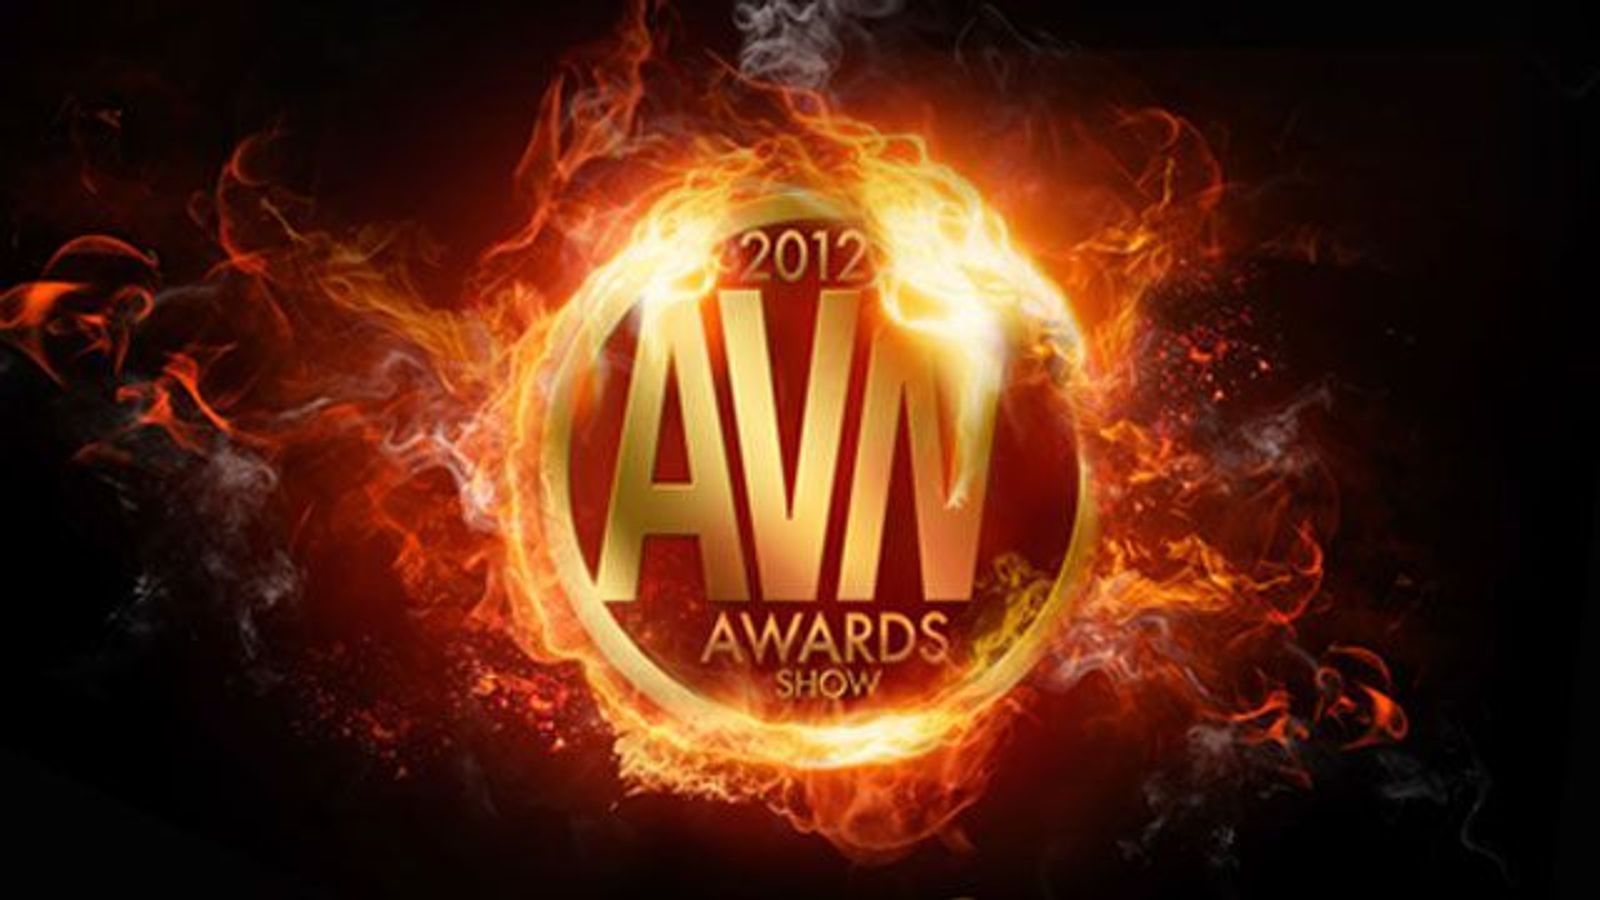 Coolio, 2 Live Crew to Perform at 2012 AVN Awards After Party